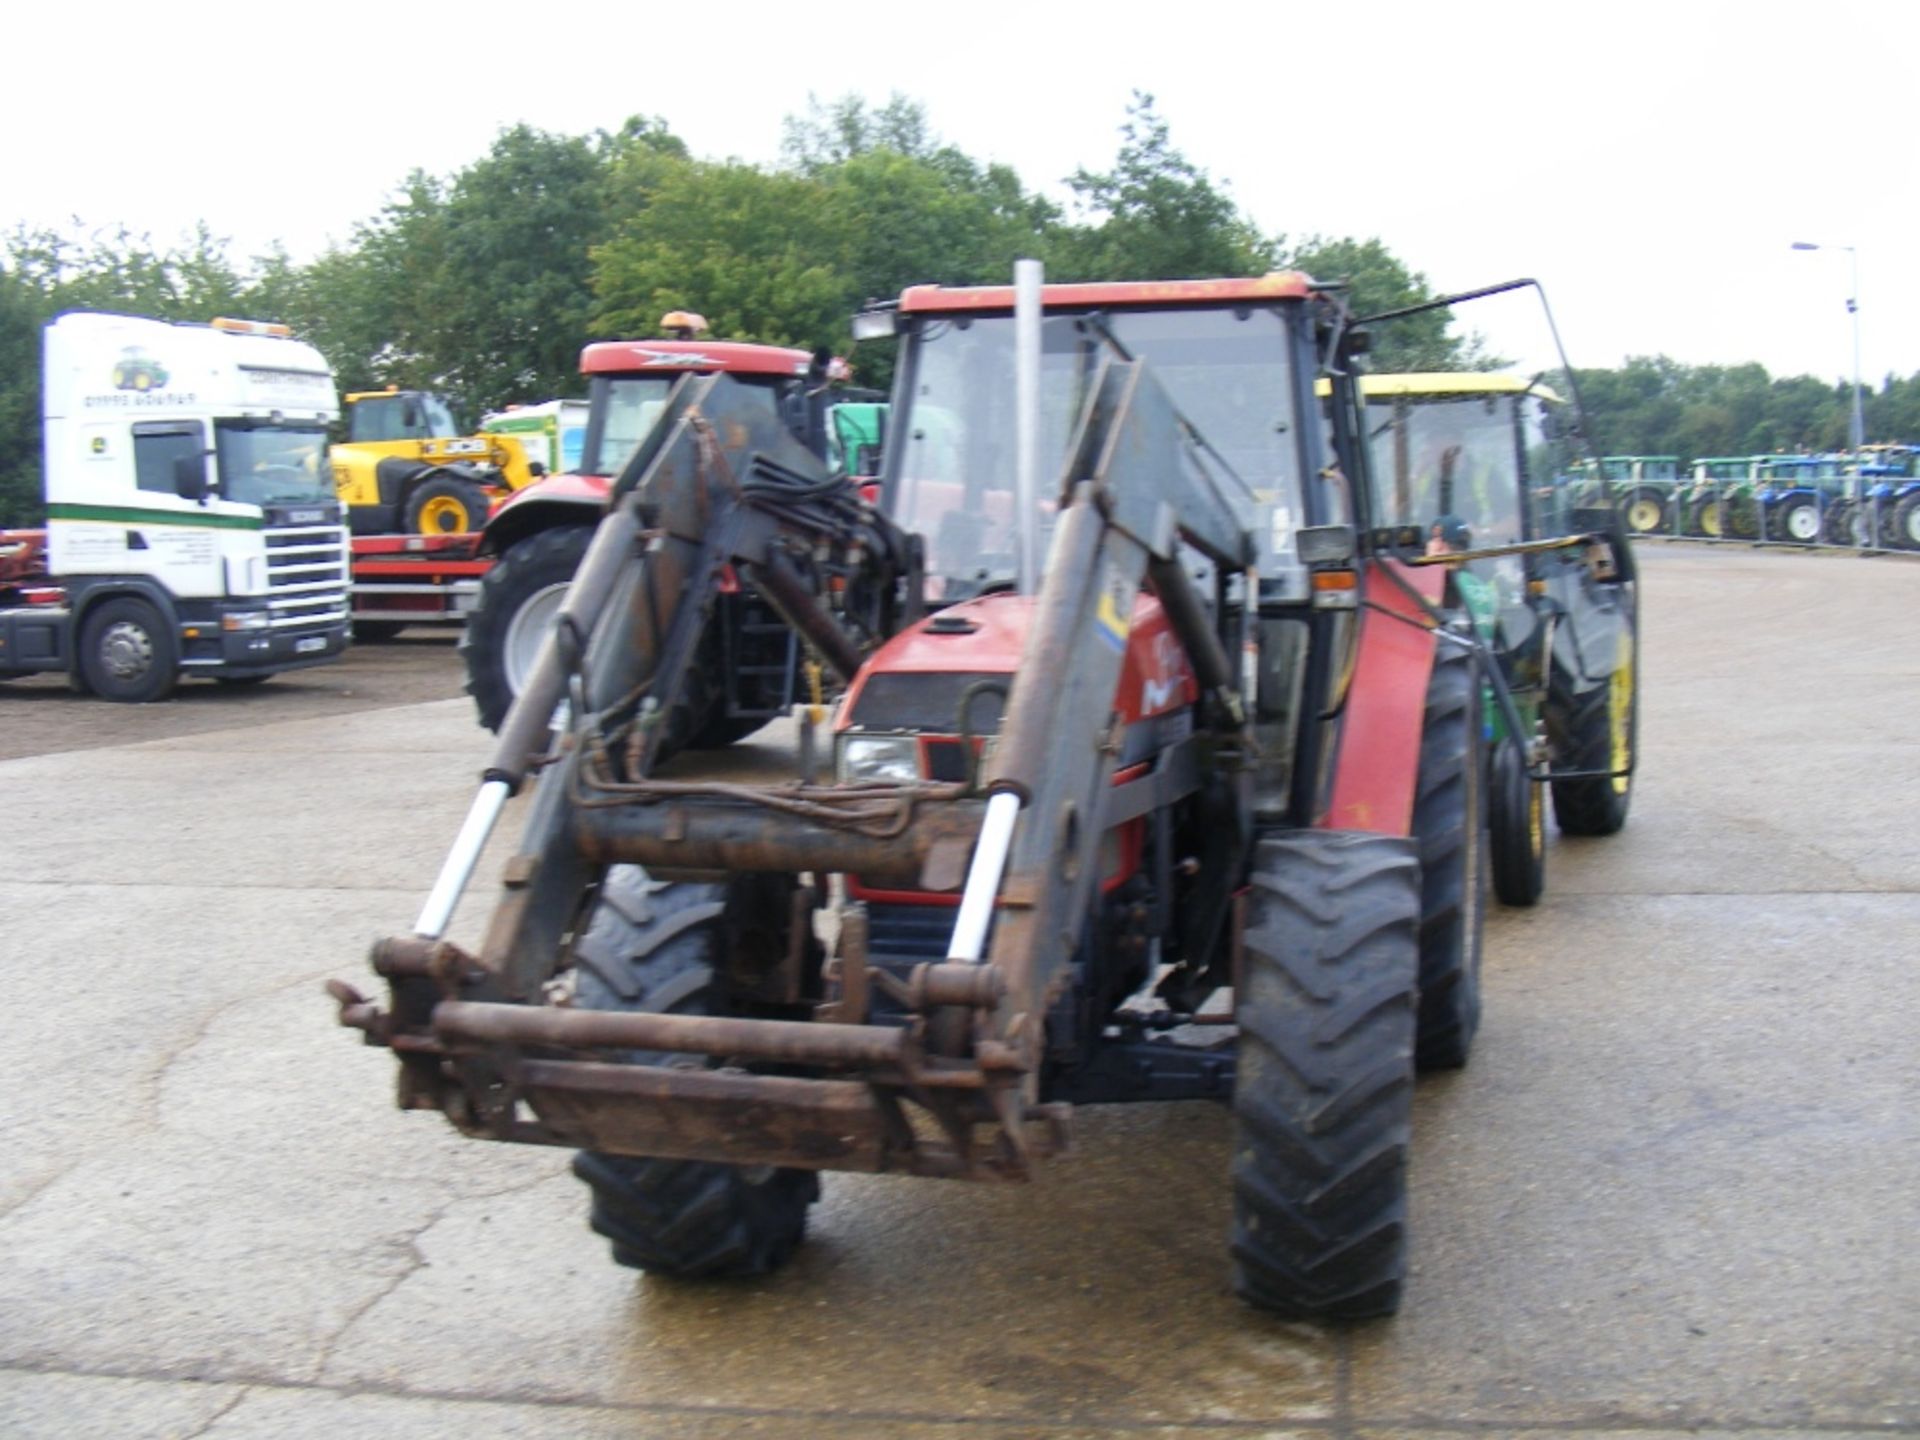 Case International 4240 Pro 4wd Tractor with Quicke 340 Loader. V5 will be supplied. Reg. No. P307 - Image 2 of 6